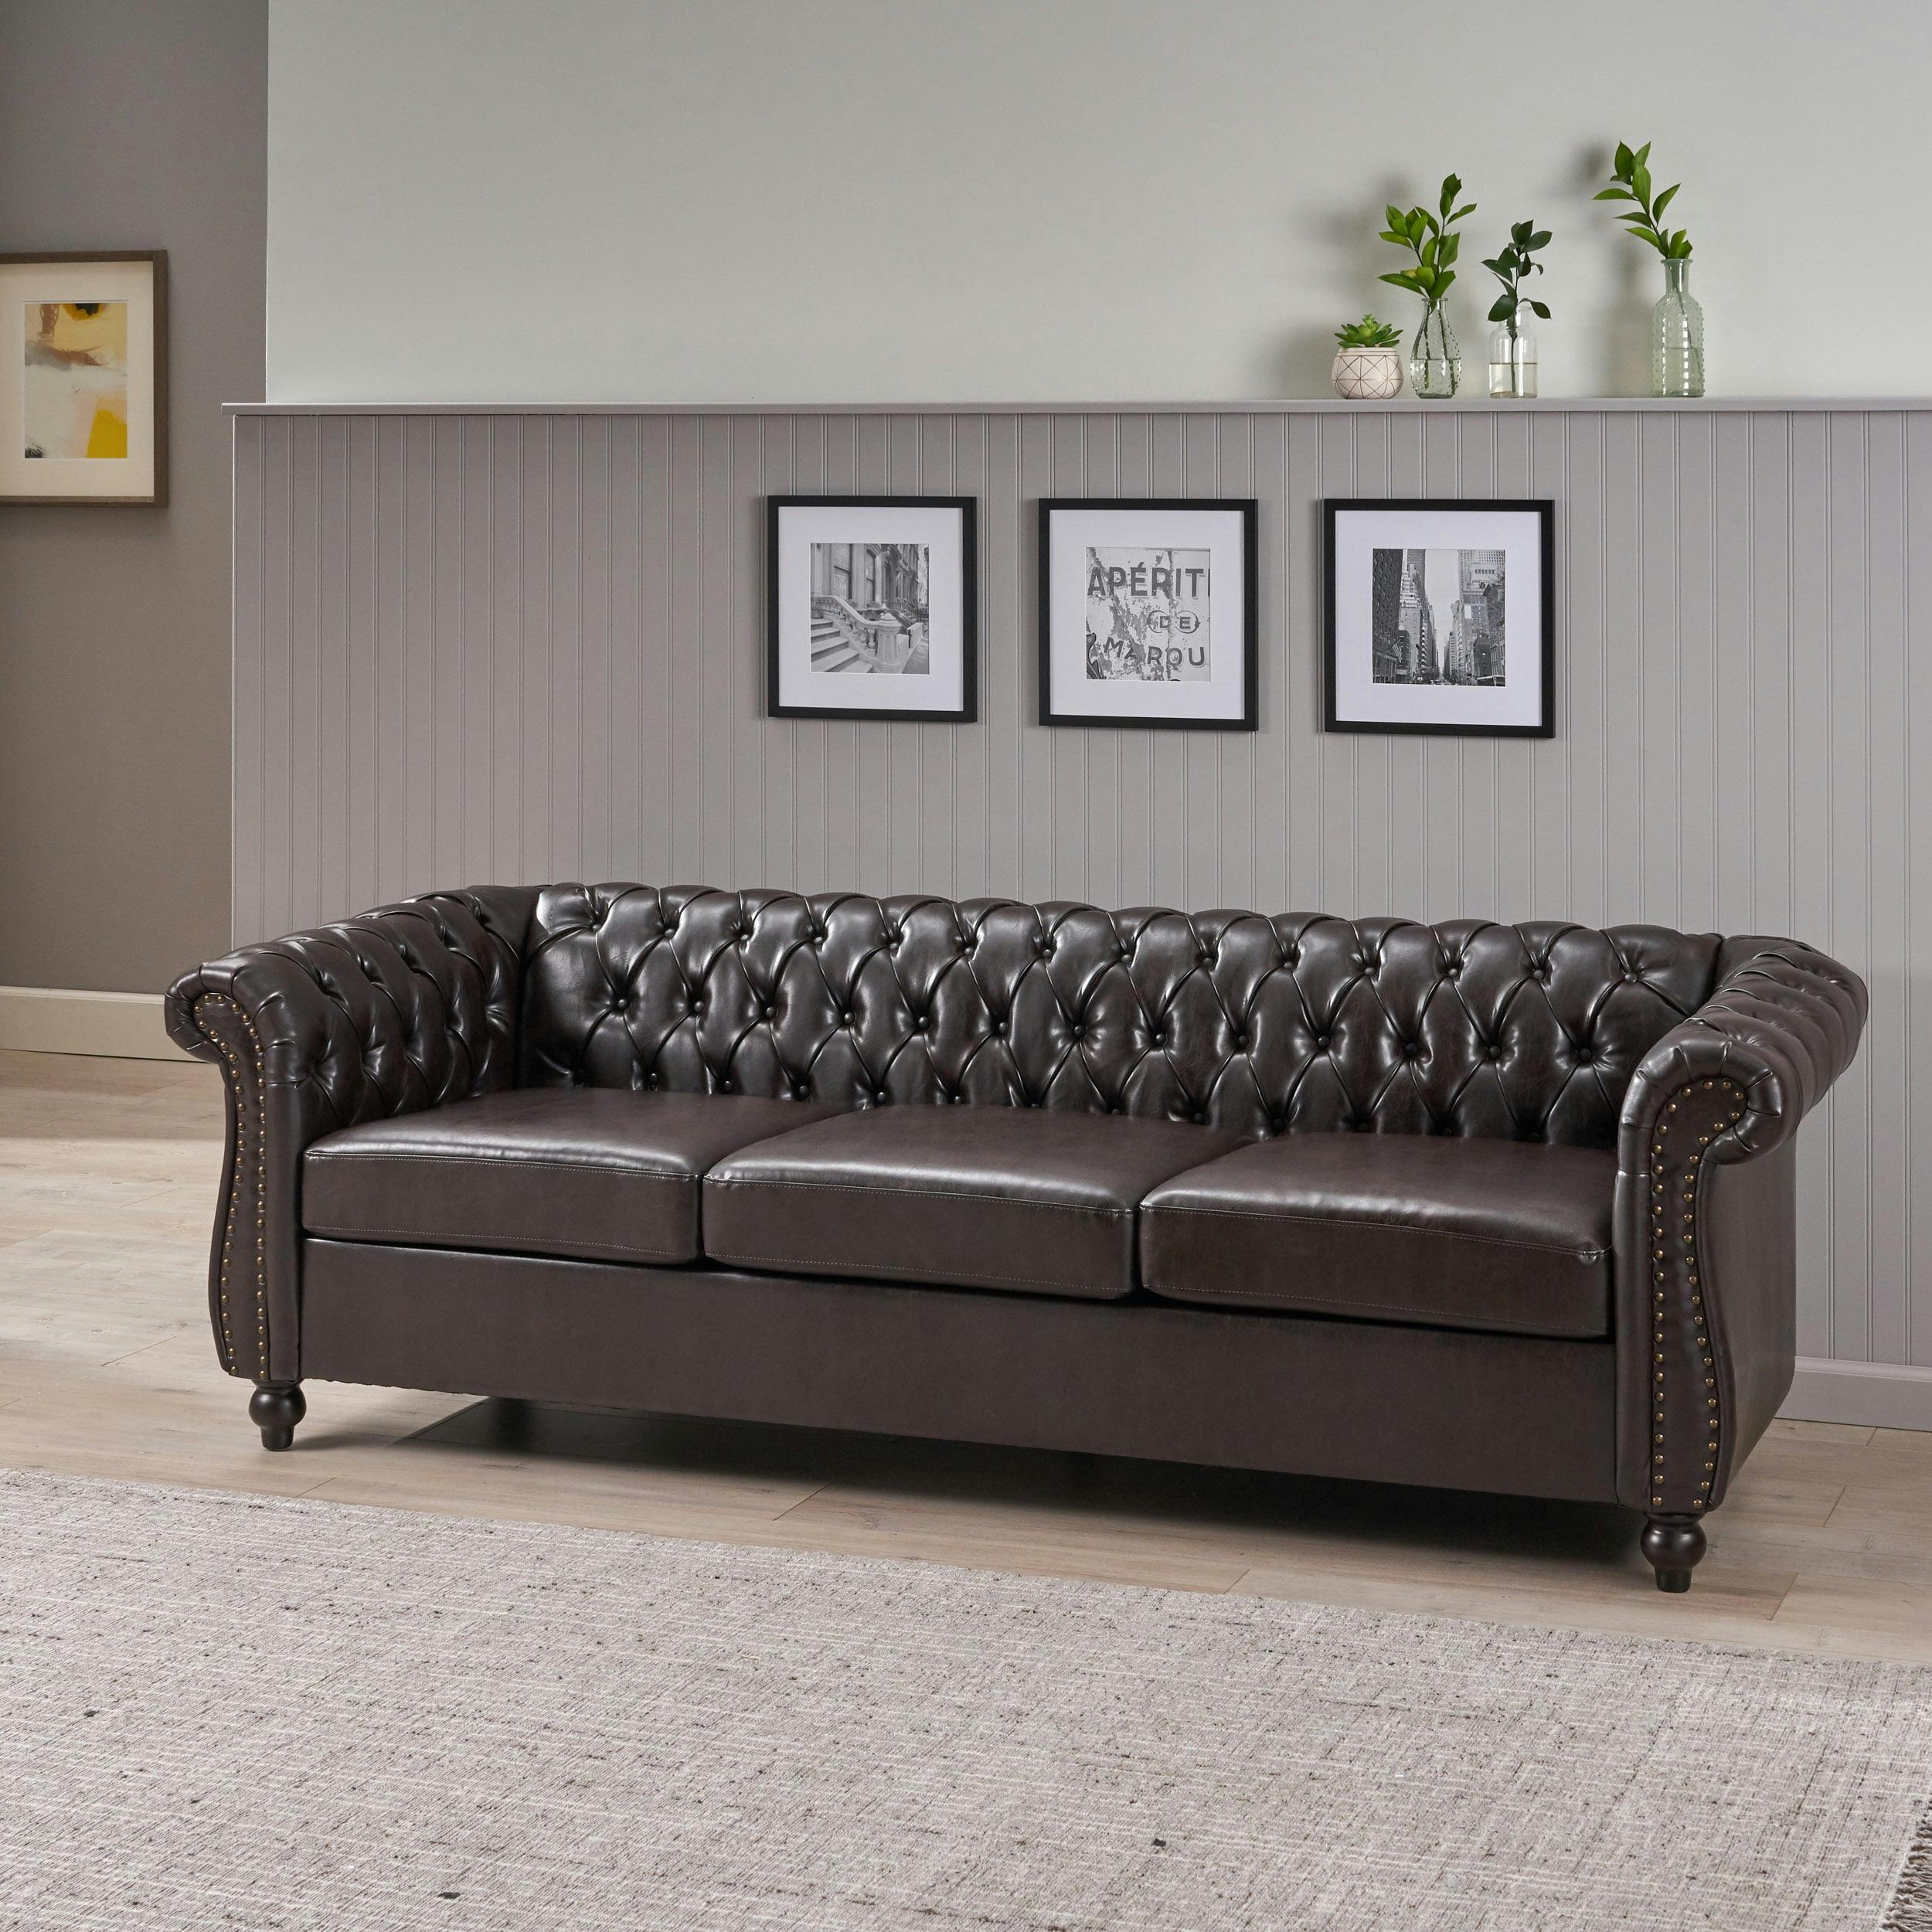 Elegant Brown Faux Leather Chesterfield Sofa with Nailhead Accents